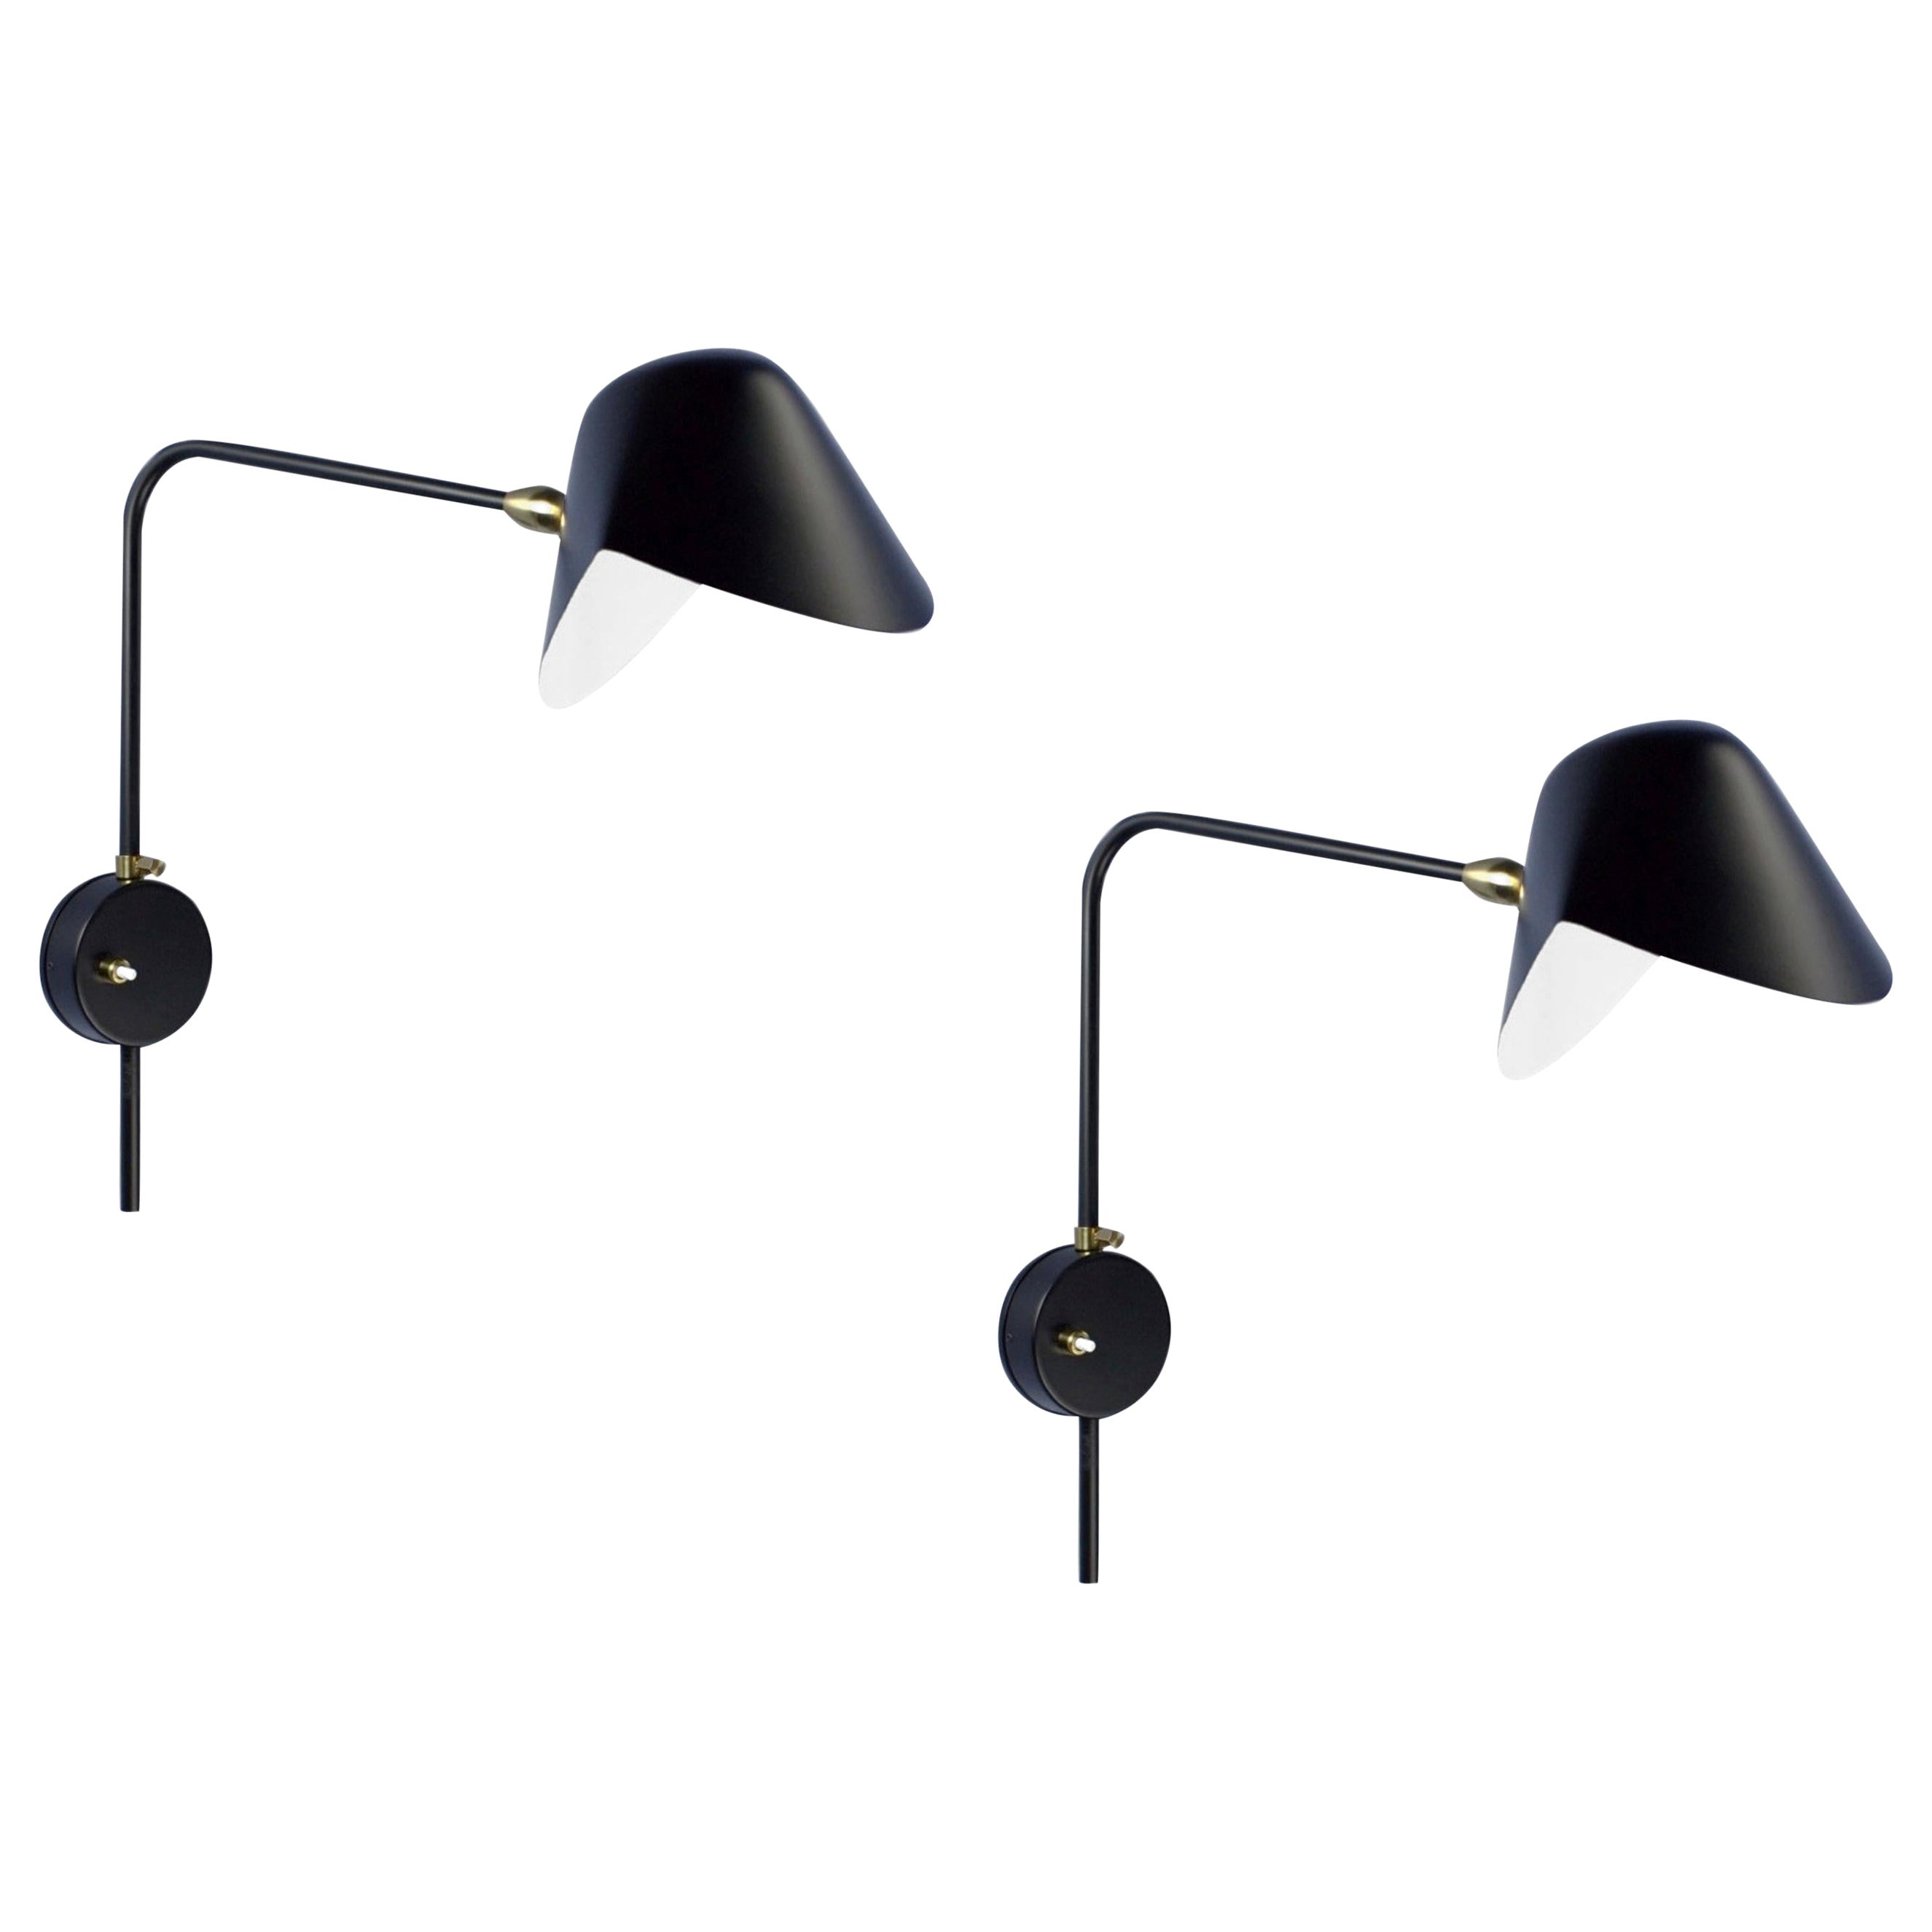 Serge Mouille moderne Anthony Wall Lampe Whit Round Fixation Box Set en vente